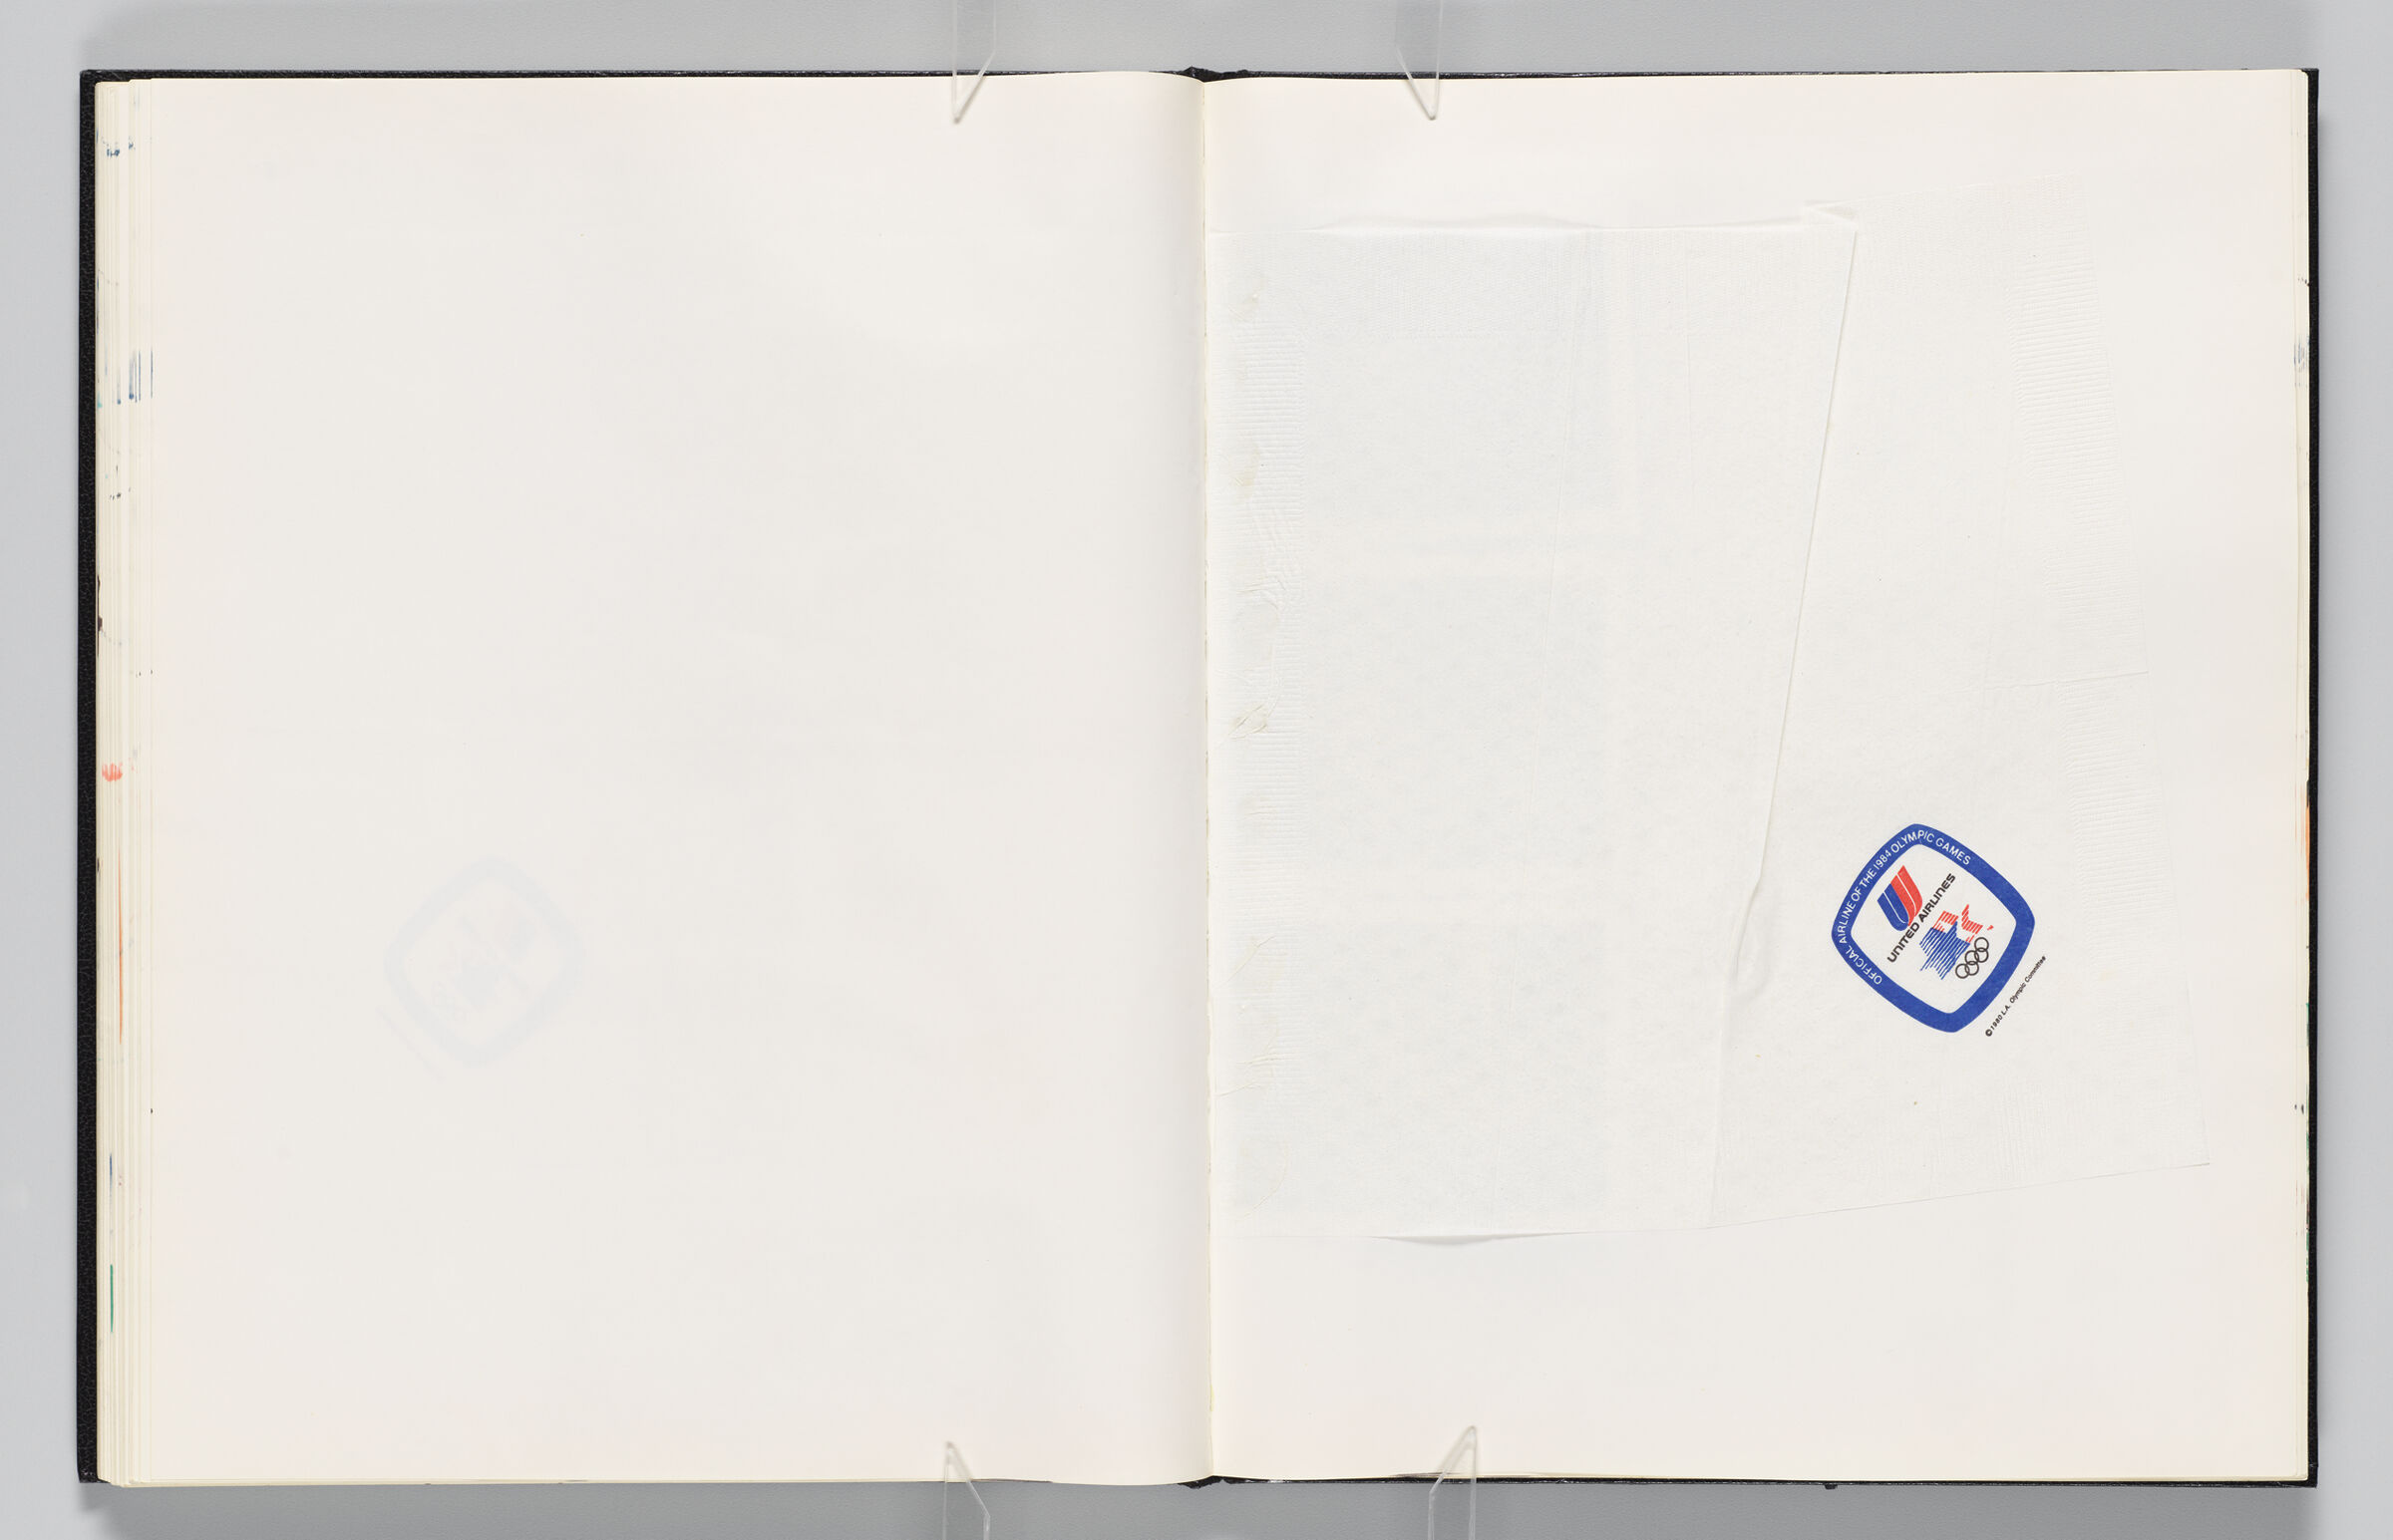 Untitled (Blank, Left Page); Untitled (United Airlines Olympic Napkin, Right Page)